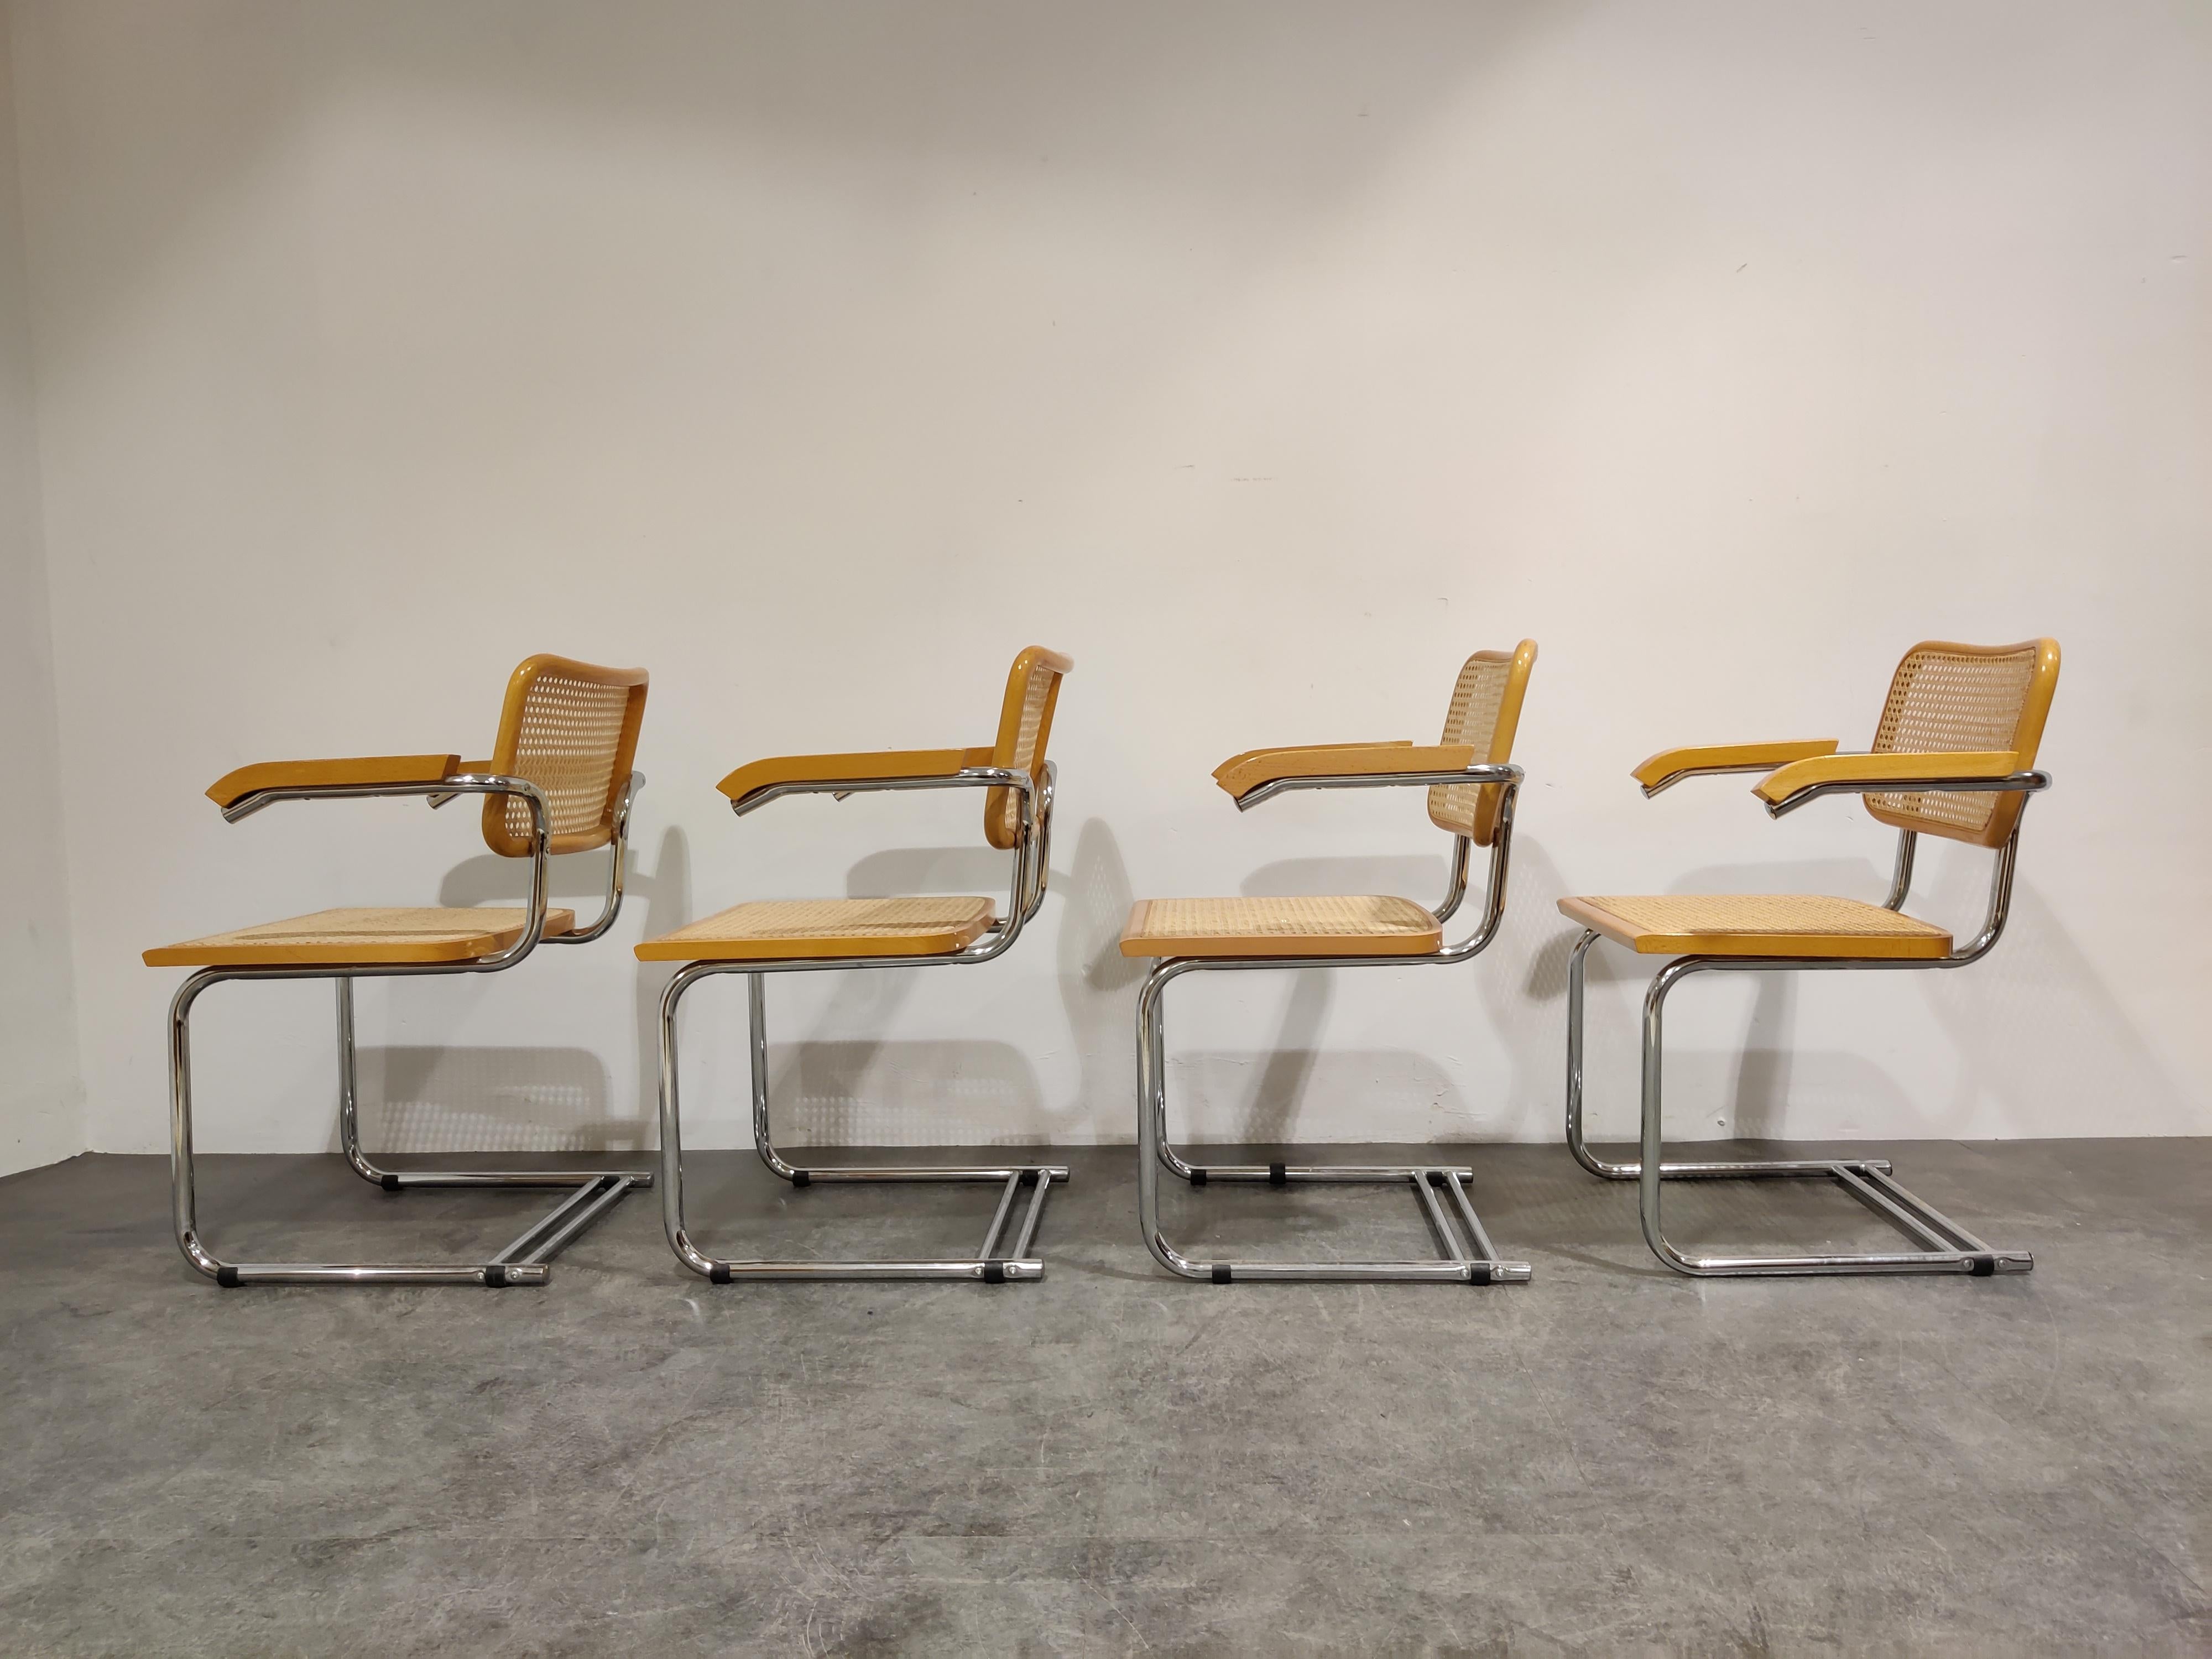 Italian Set of 4 Vintage Marcel Breuer Style Armchairs, Made in Italy, 1970s